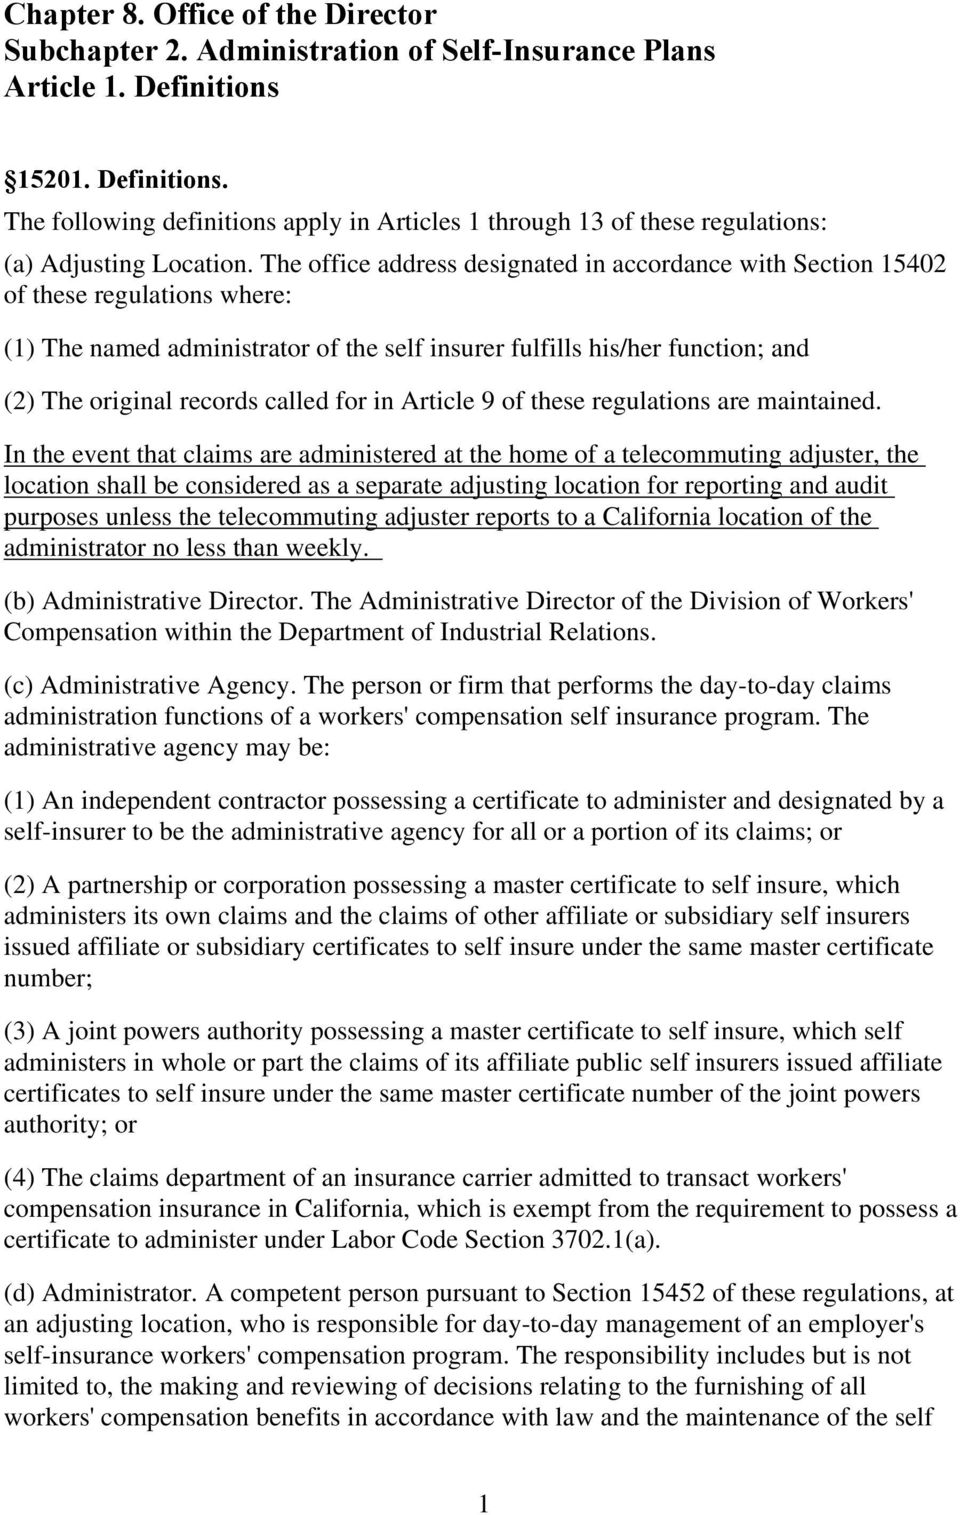 The office address designated in accordance with Section 15402 of these regulations where: (1) The named administrator of the self insurer fulfills his/her function; and (2) The original records